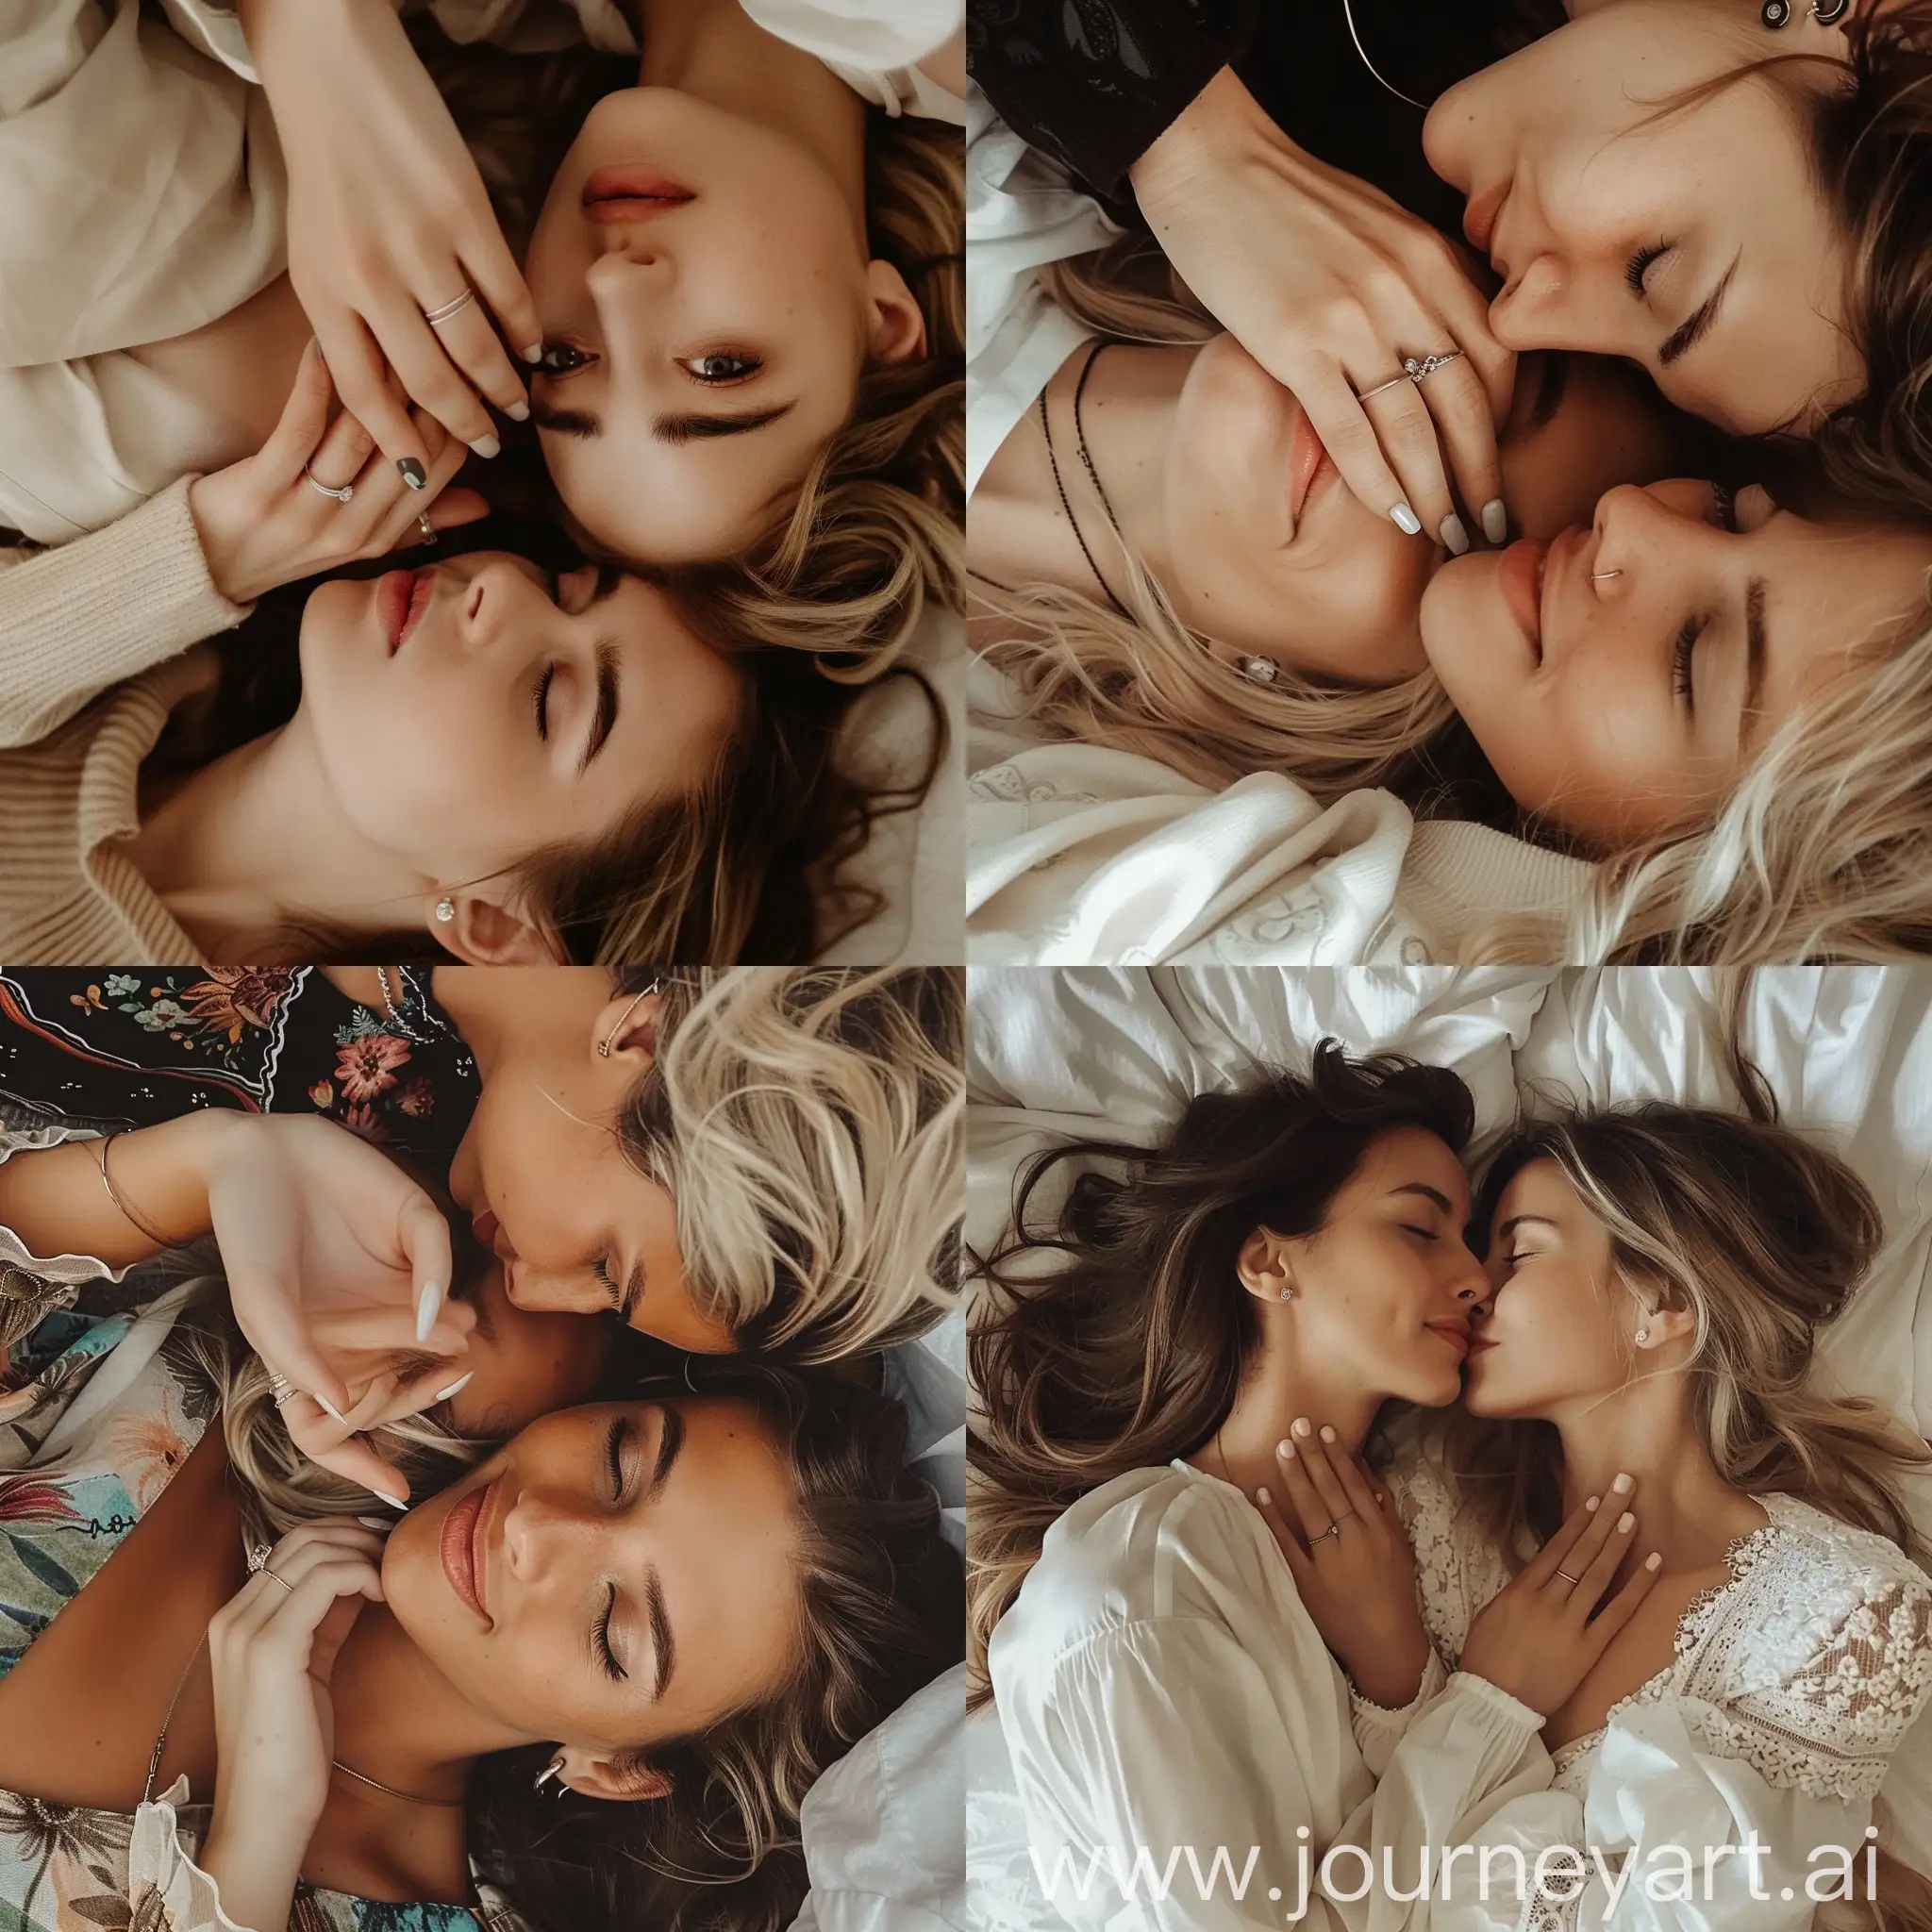 Aesthetic instagram selfie of a female couple, average looking, lying down, romantic, adorable, young, kissing cheek, hands on face, rings, white gel nail polish, seductive, passion, looking into each others eyes